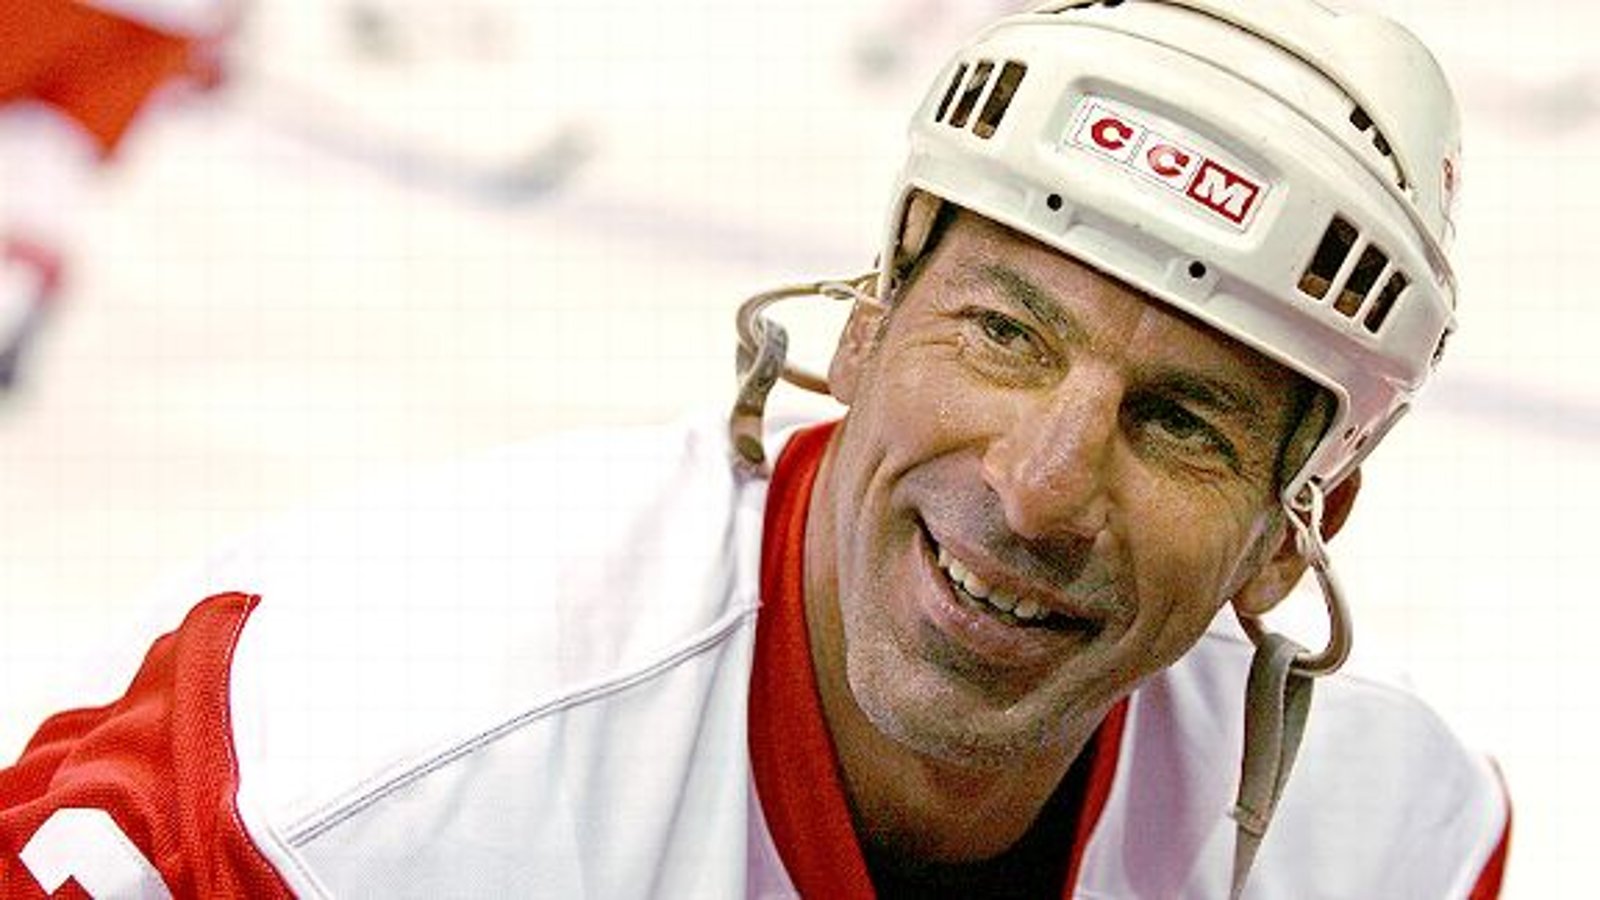 Sports Photo Gallery - At 45 Chris Chelios show no signs of slowing - The  Detroit News Online